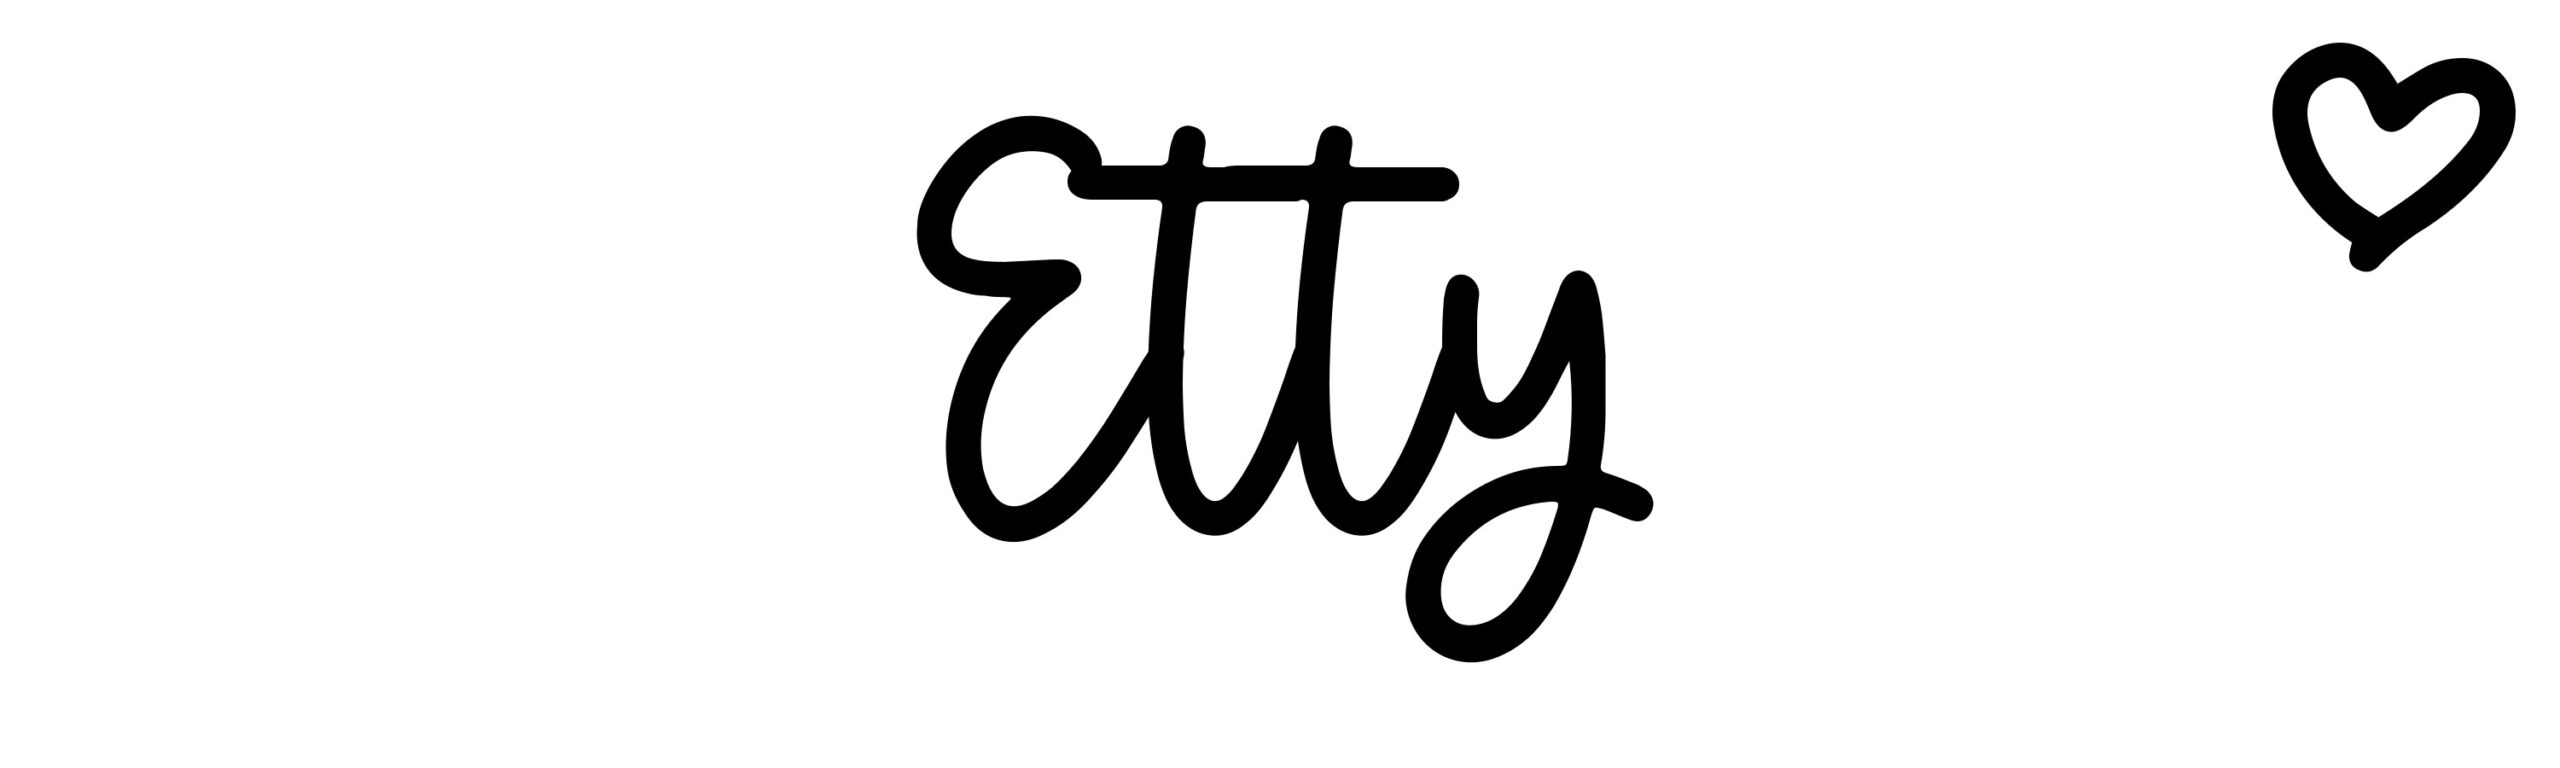 Etty - Name meaning, origin, variations and more